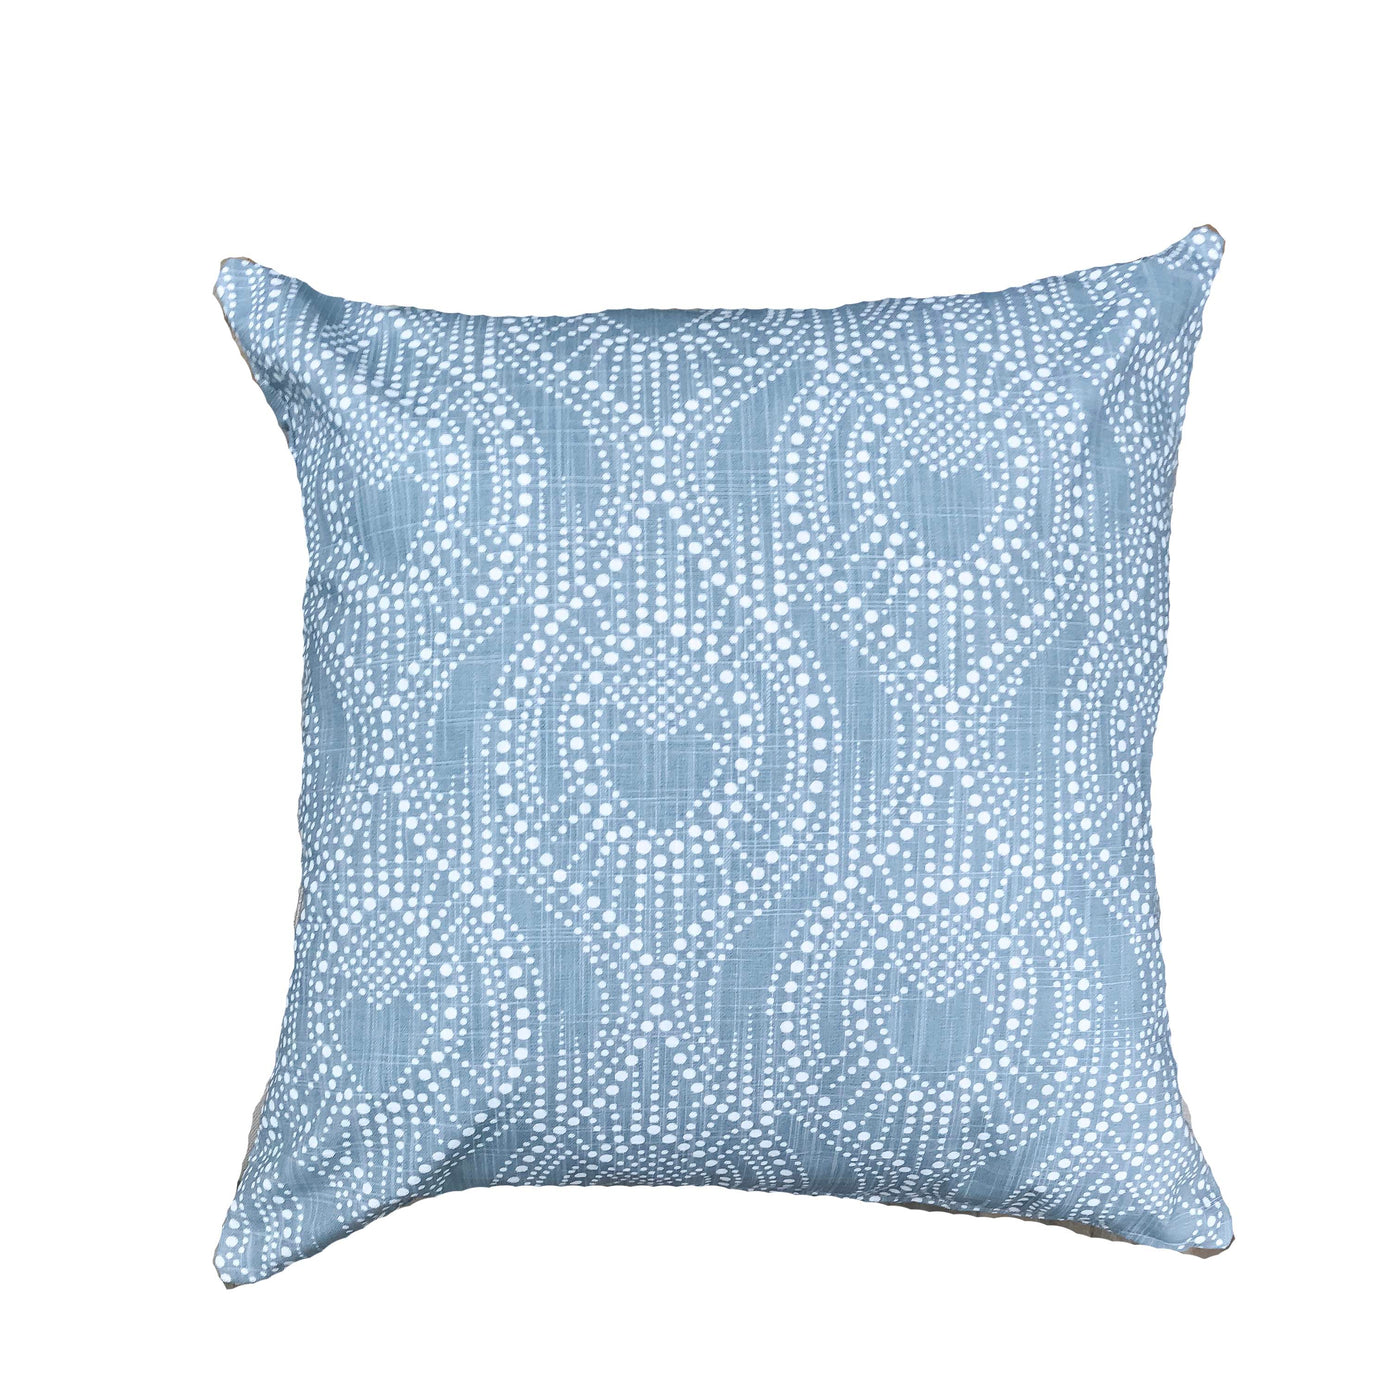 Soft blue pillows with style - CARTER - Studio Pillows